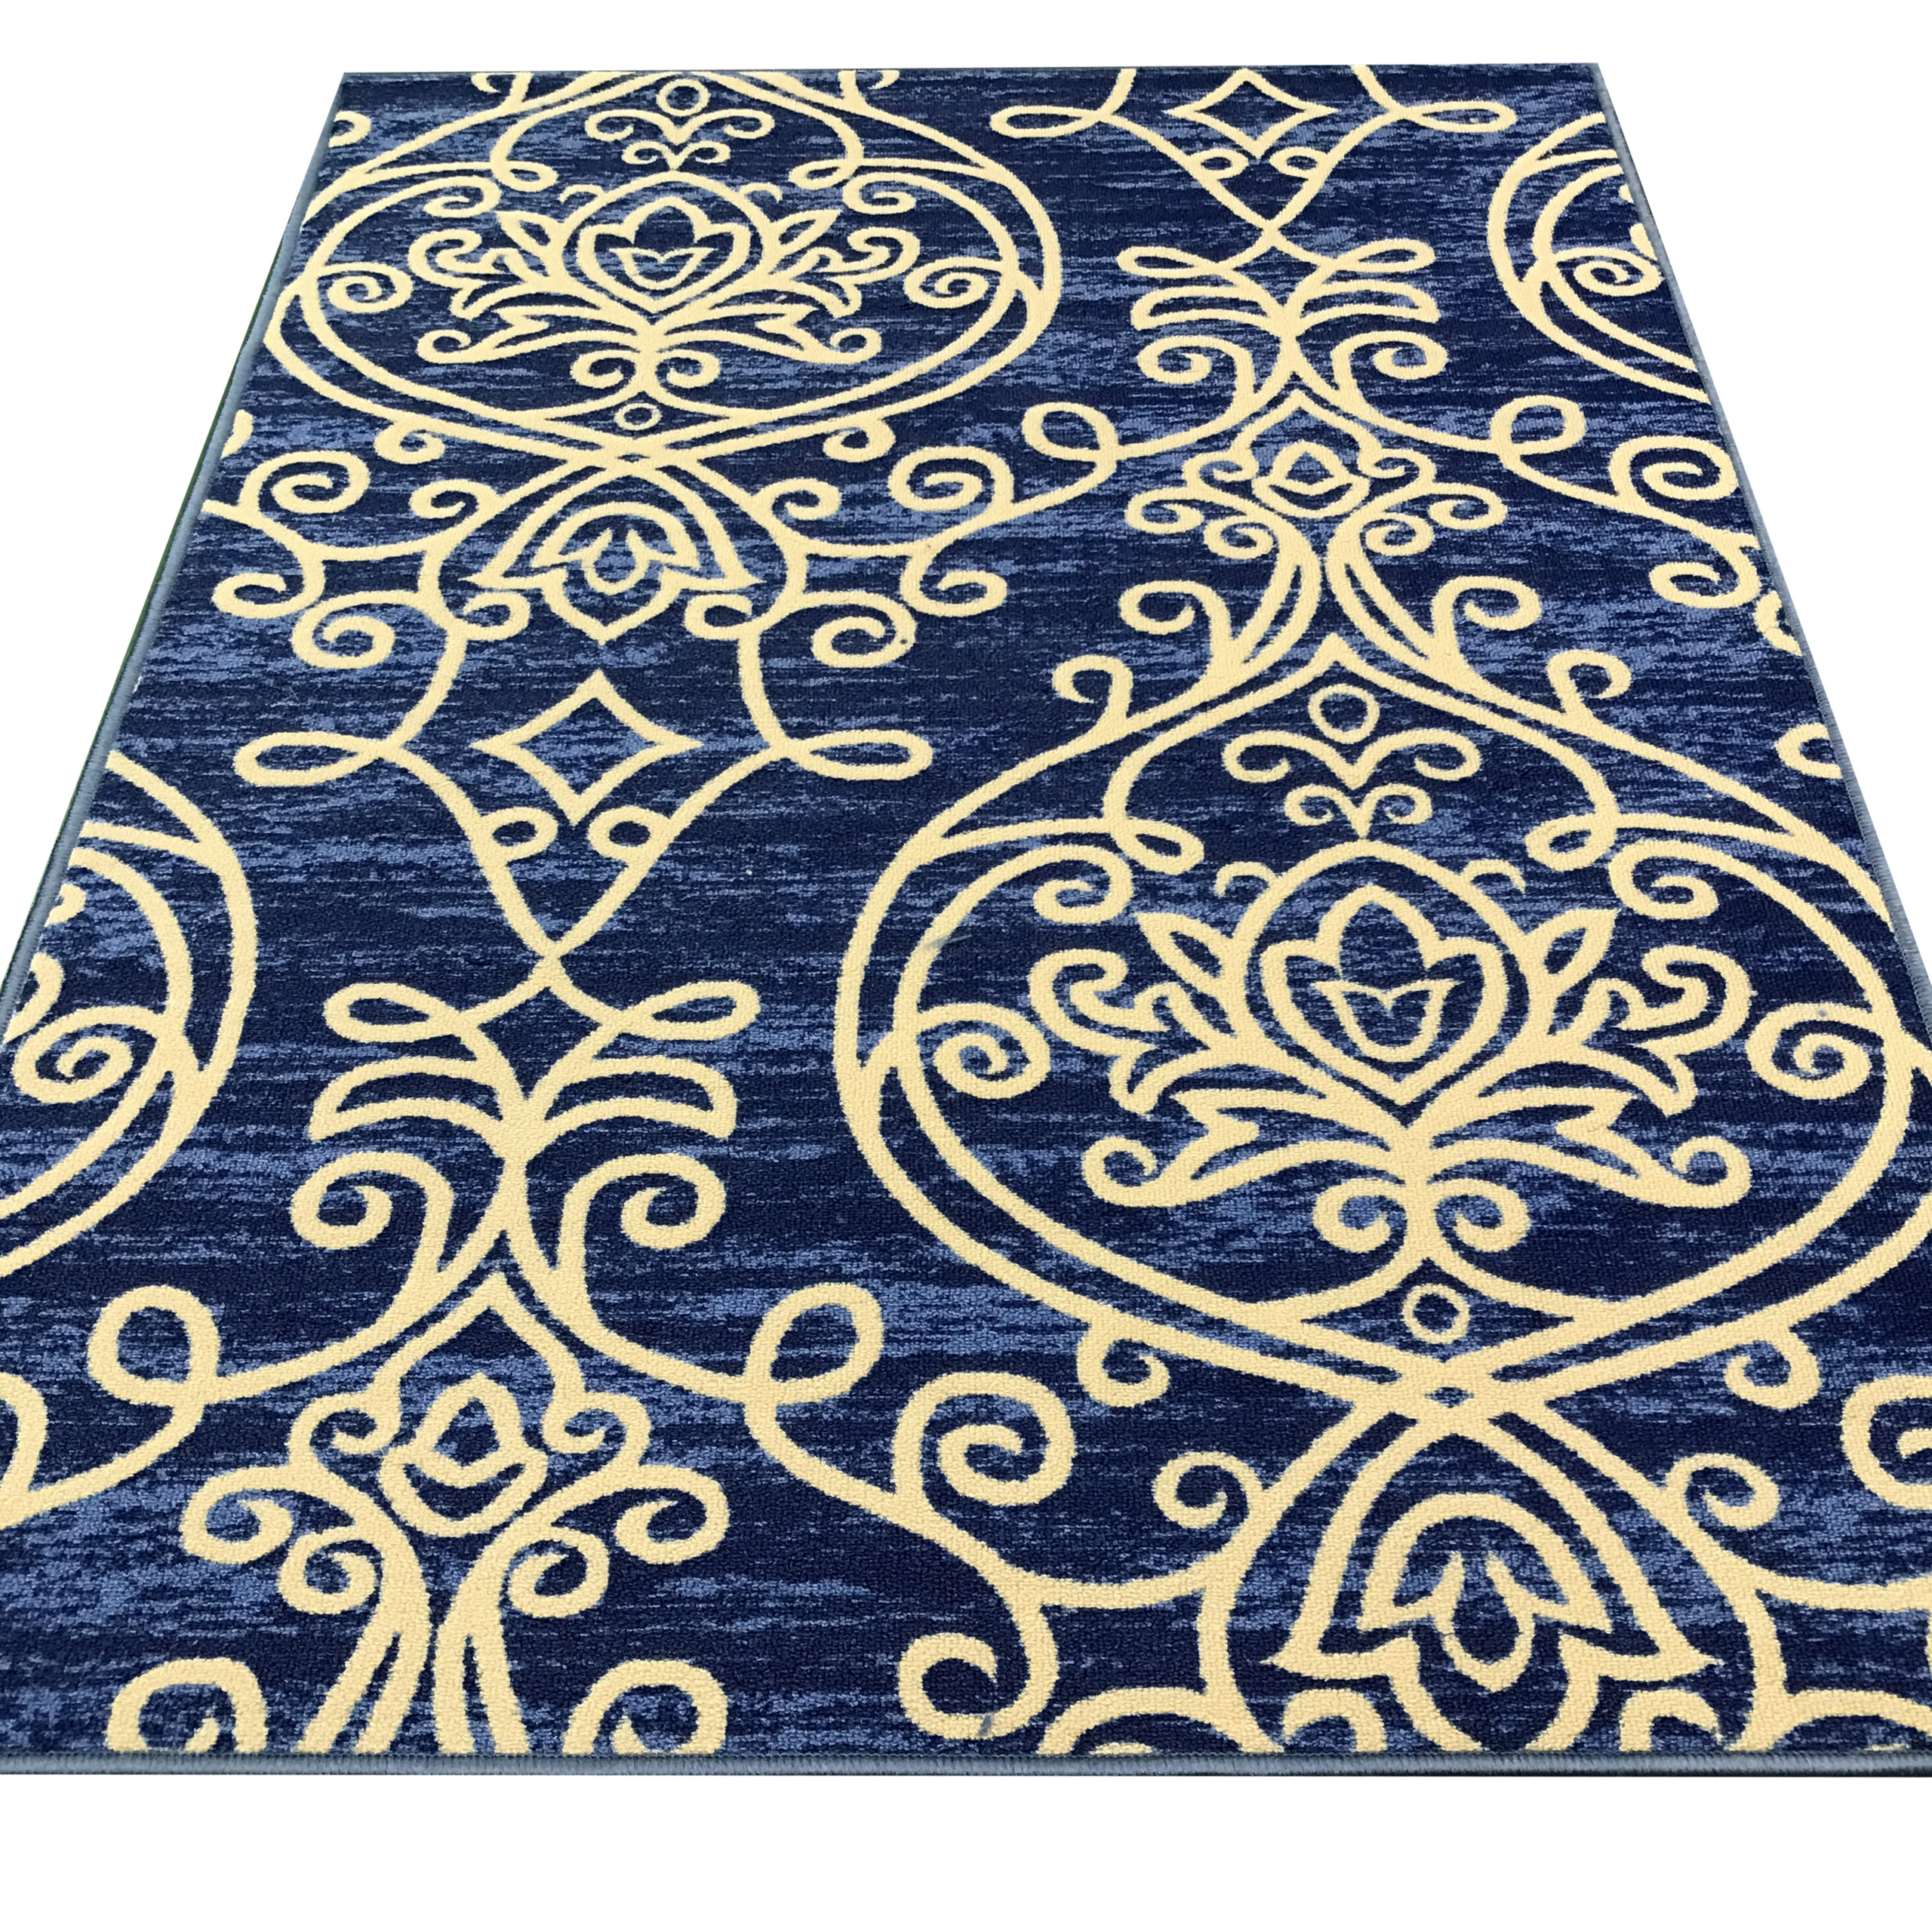 Rubber Backed Area Rugs Visualhunt, Area Rugs With Rubber Backing